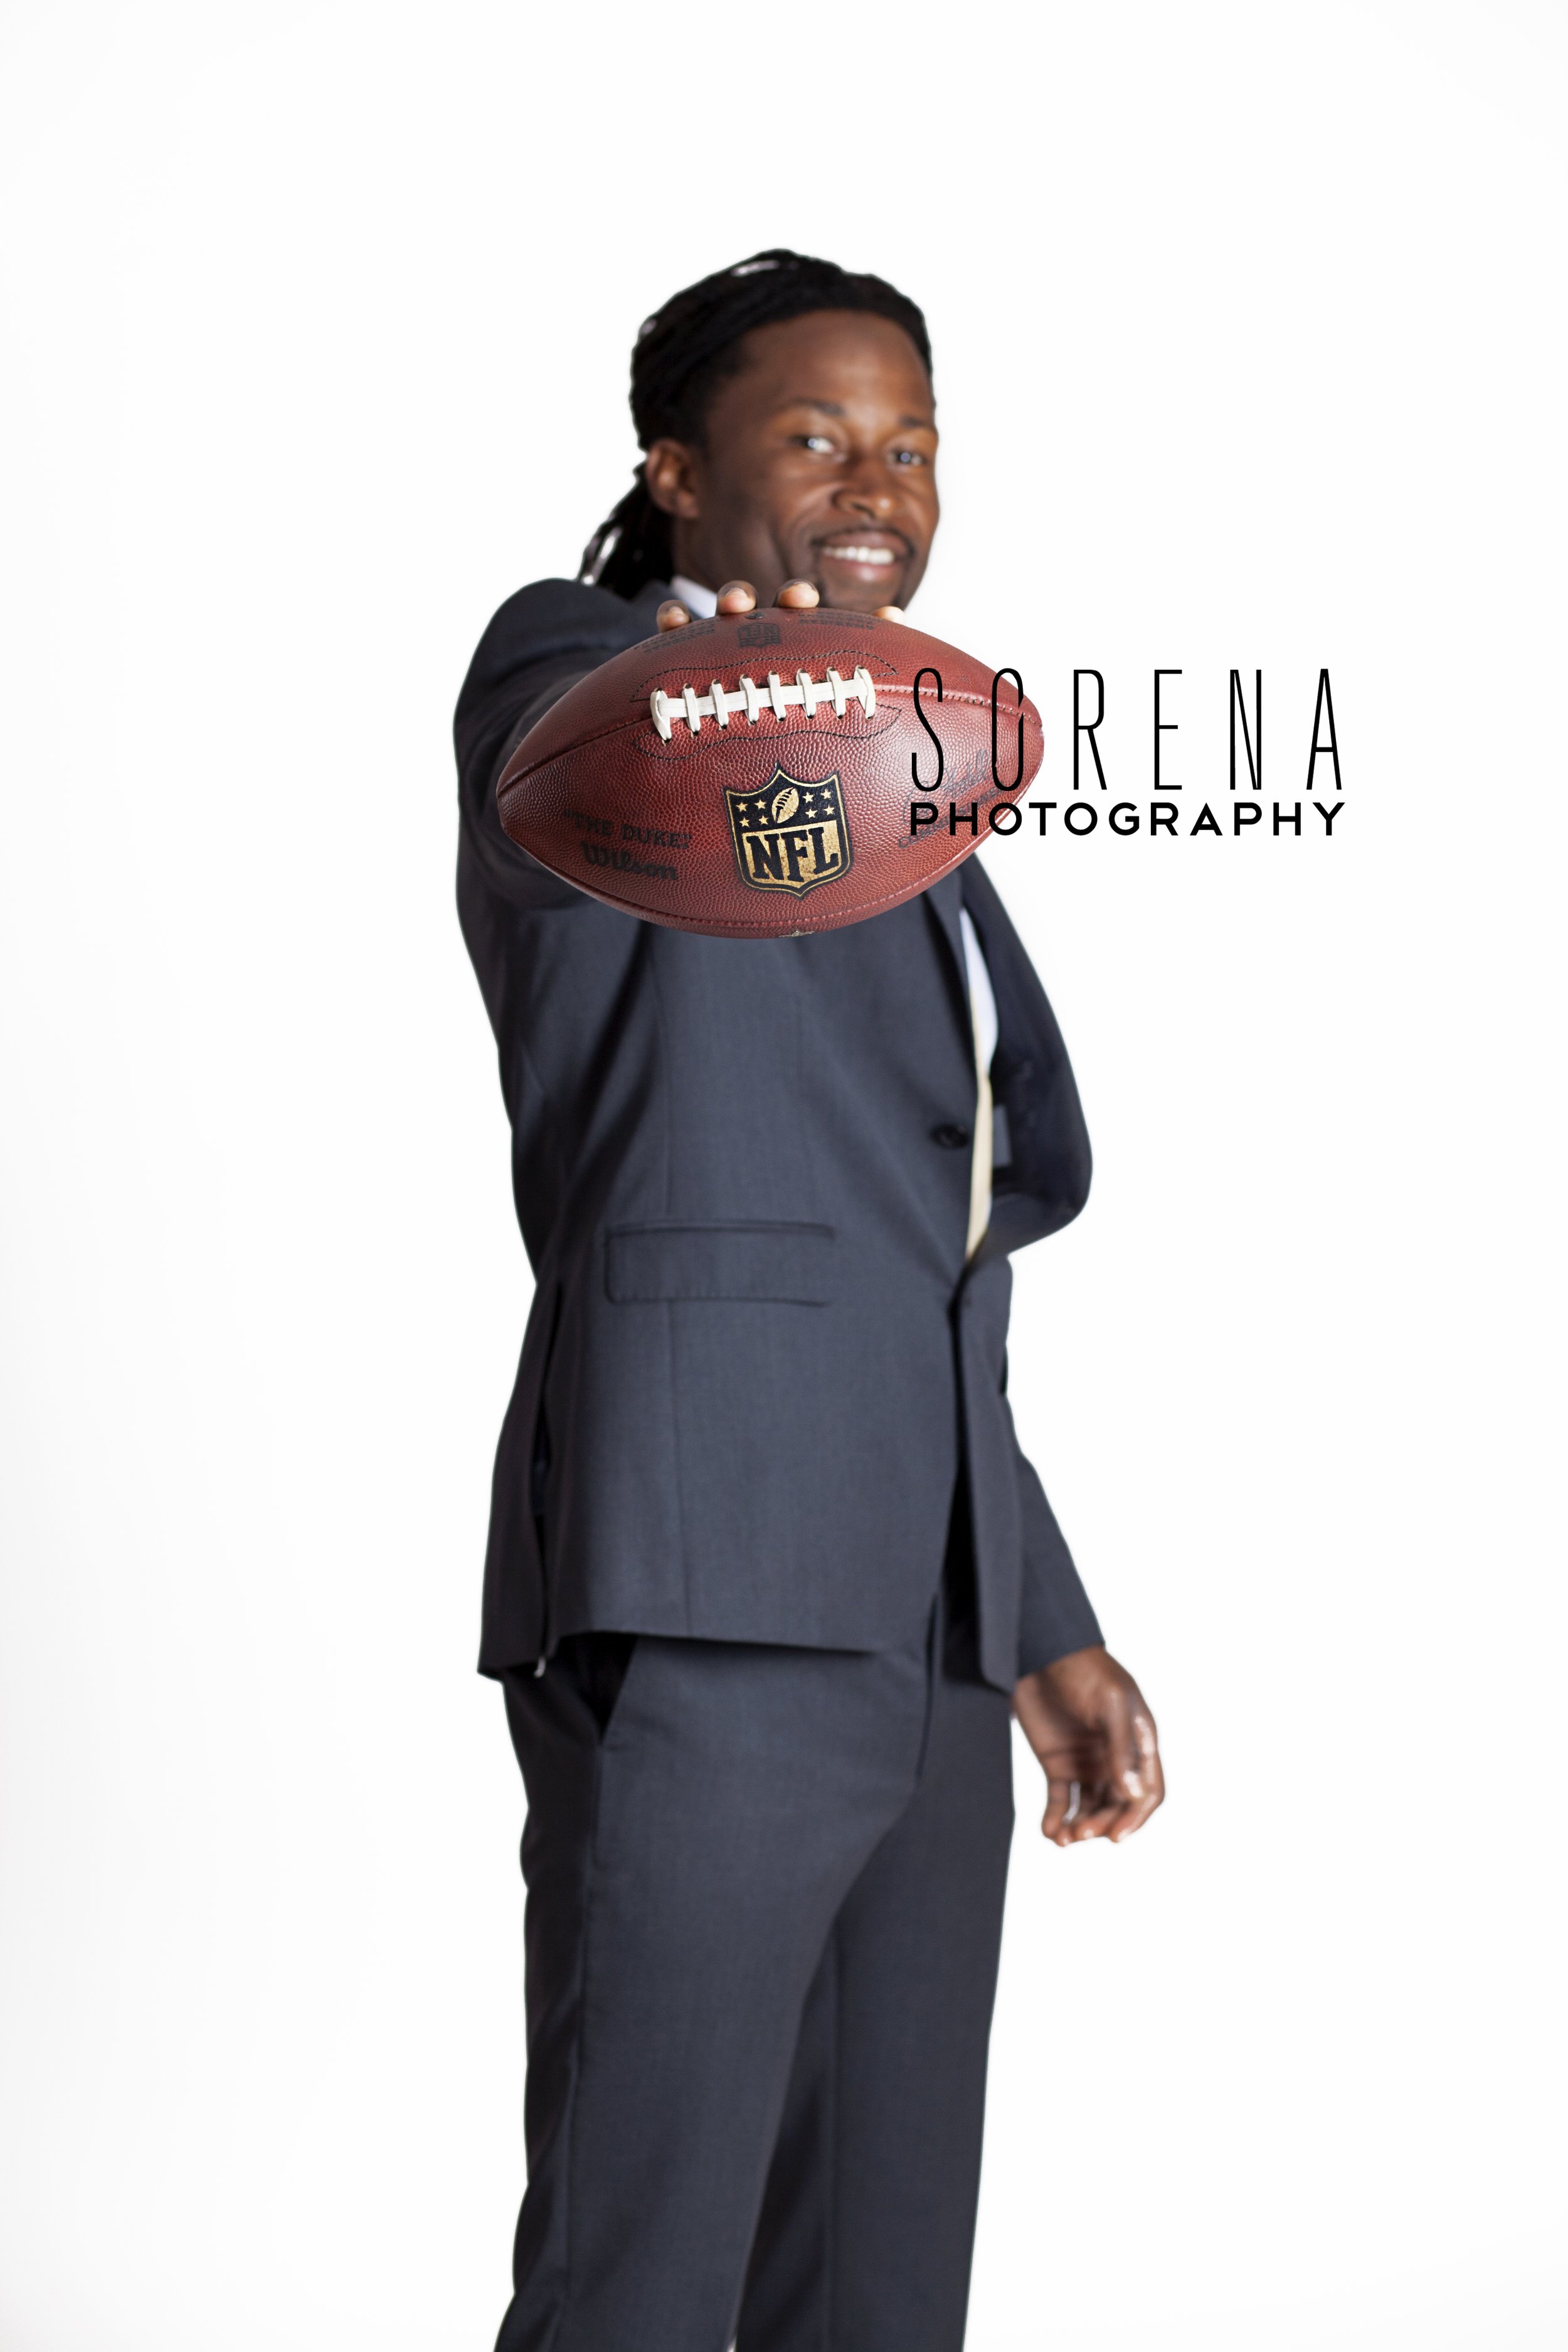 Travaris Cadet, in a sleek suit, grips a football, ready to bring his game face from the locker room to the office.